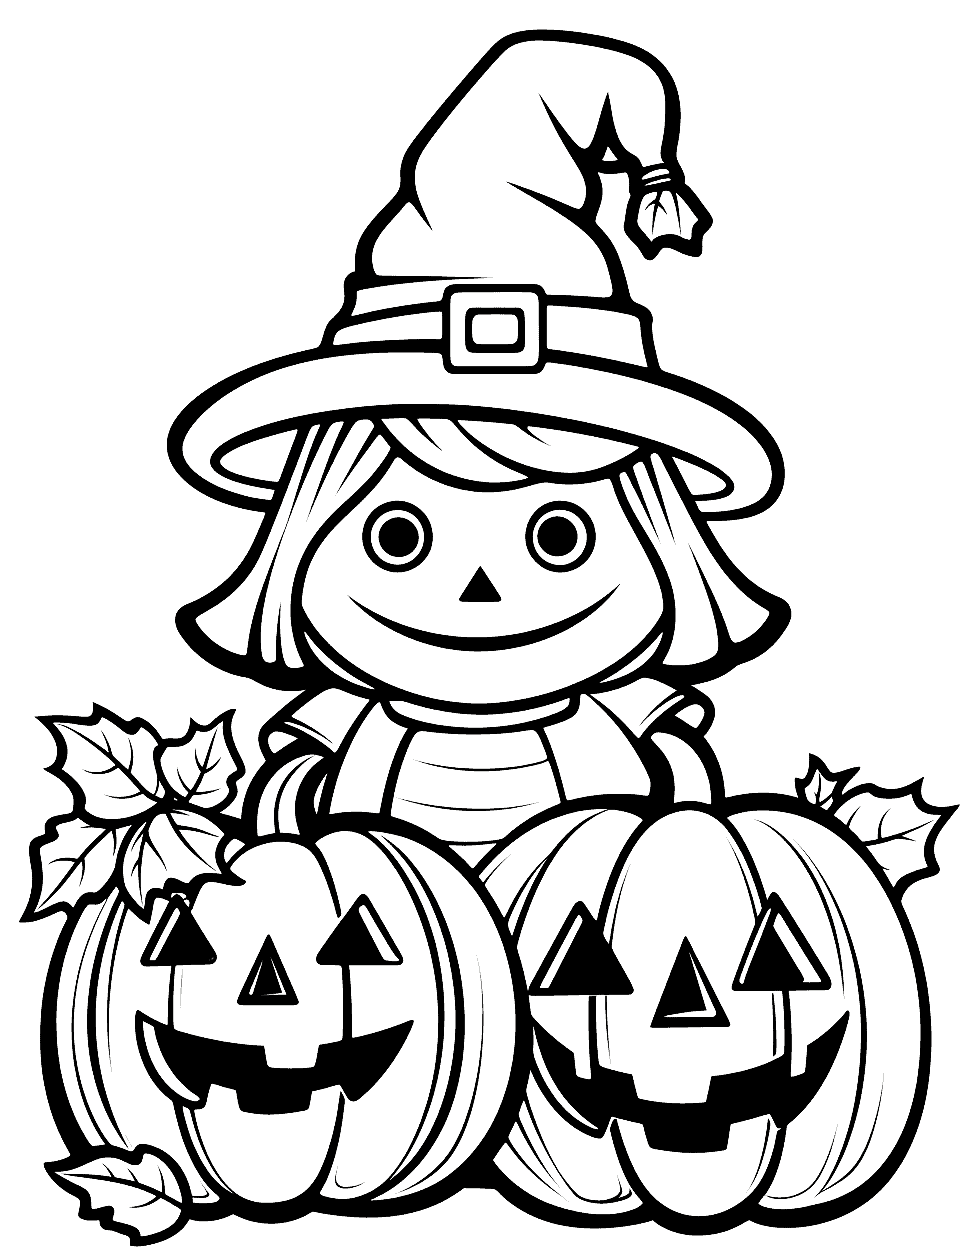 Pumpkin and Witch Doll Halloween Coloring Page - A cute Halloween scene featuring a pumpkin and witch doll, great for young kids practicing coloring within the lines.